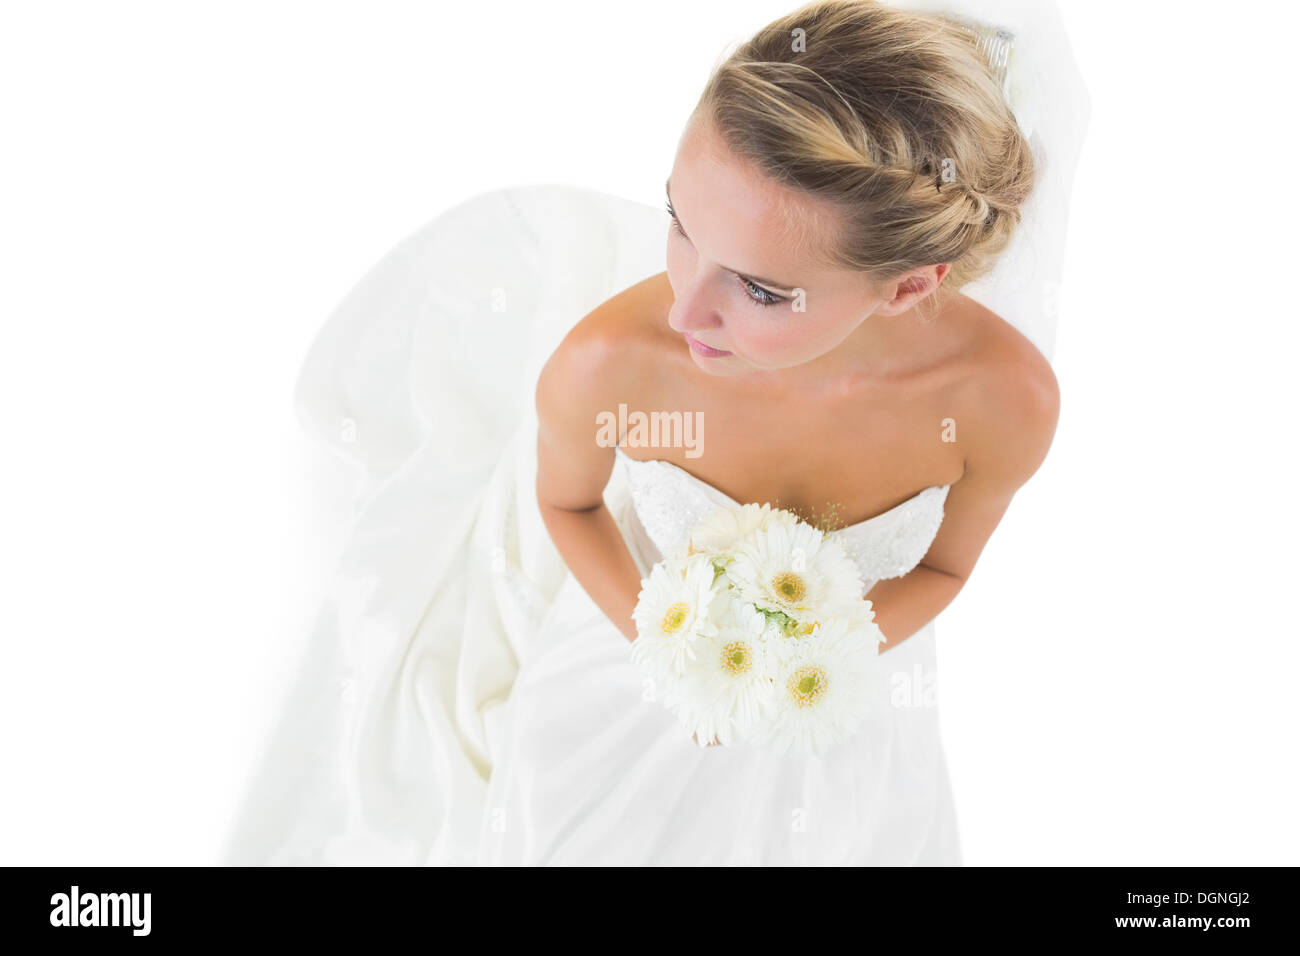 High angle view of blonde bride holding a bouquet Banque D'Images